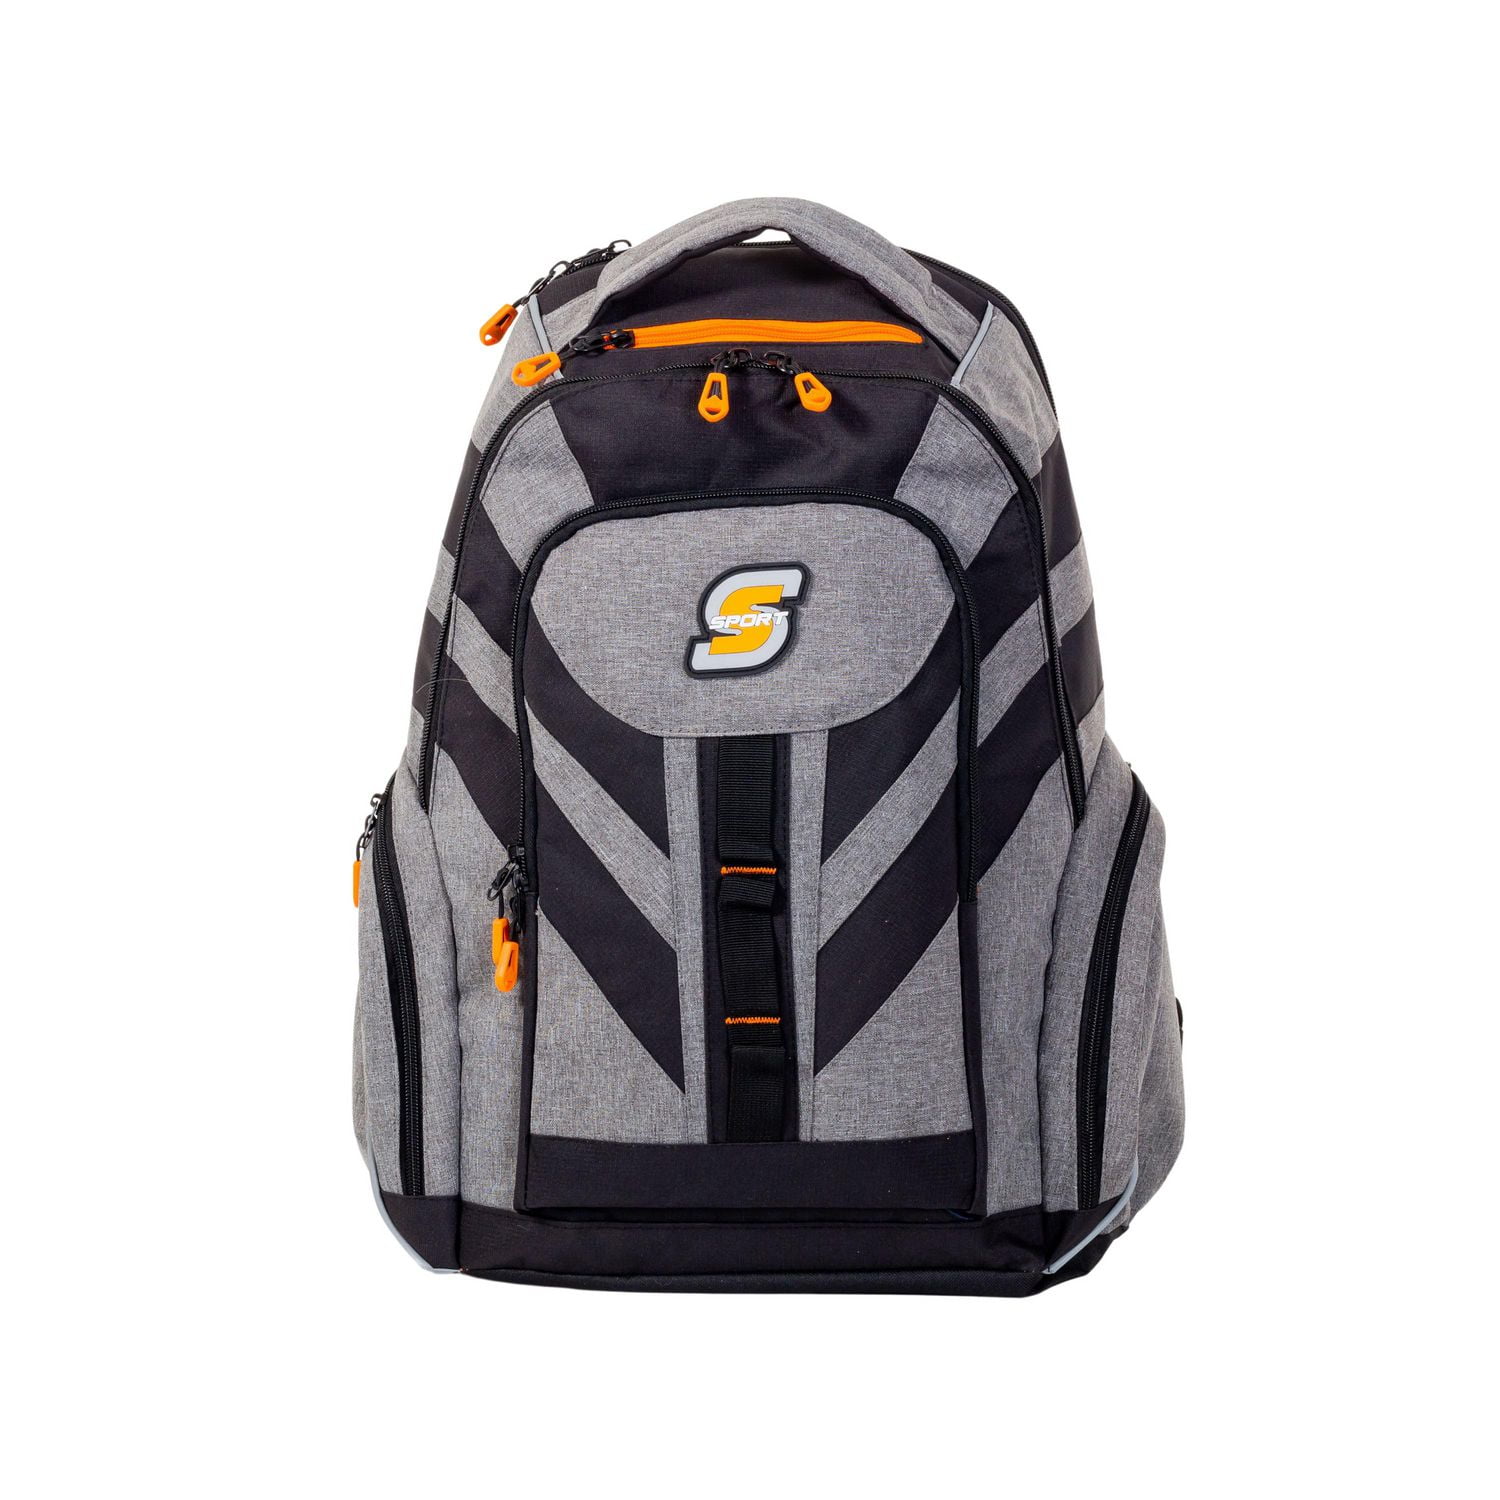 S Sport by Skechers multi compartment backpack, Multi Compartment